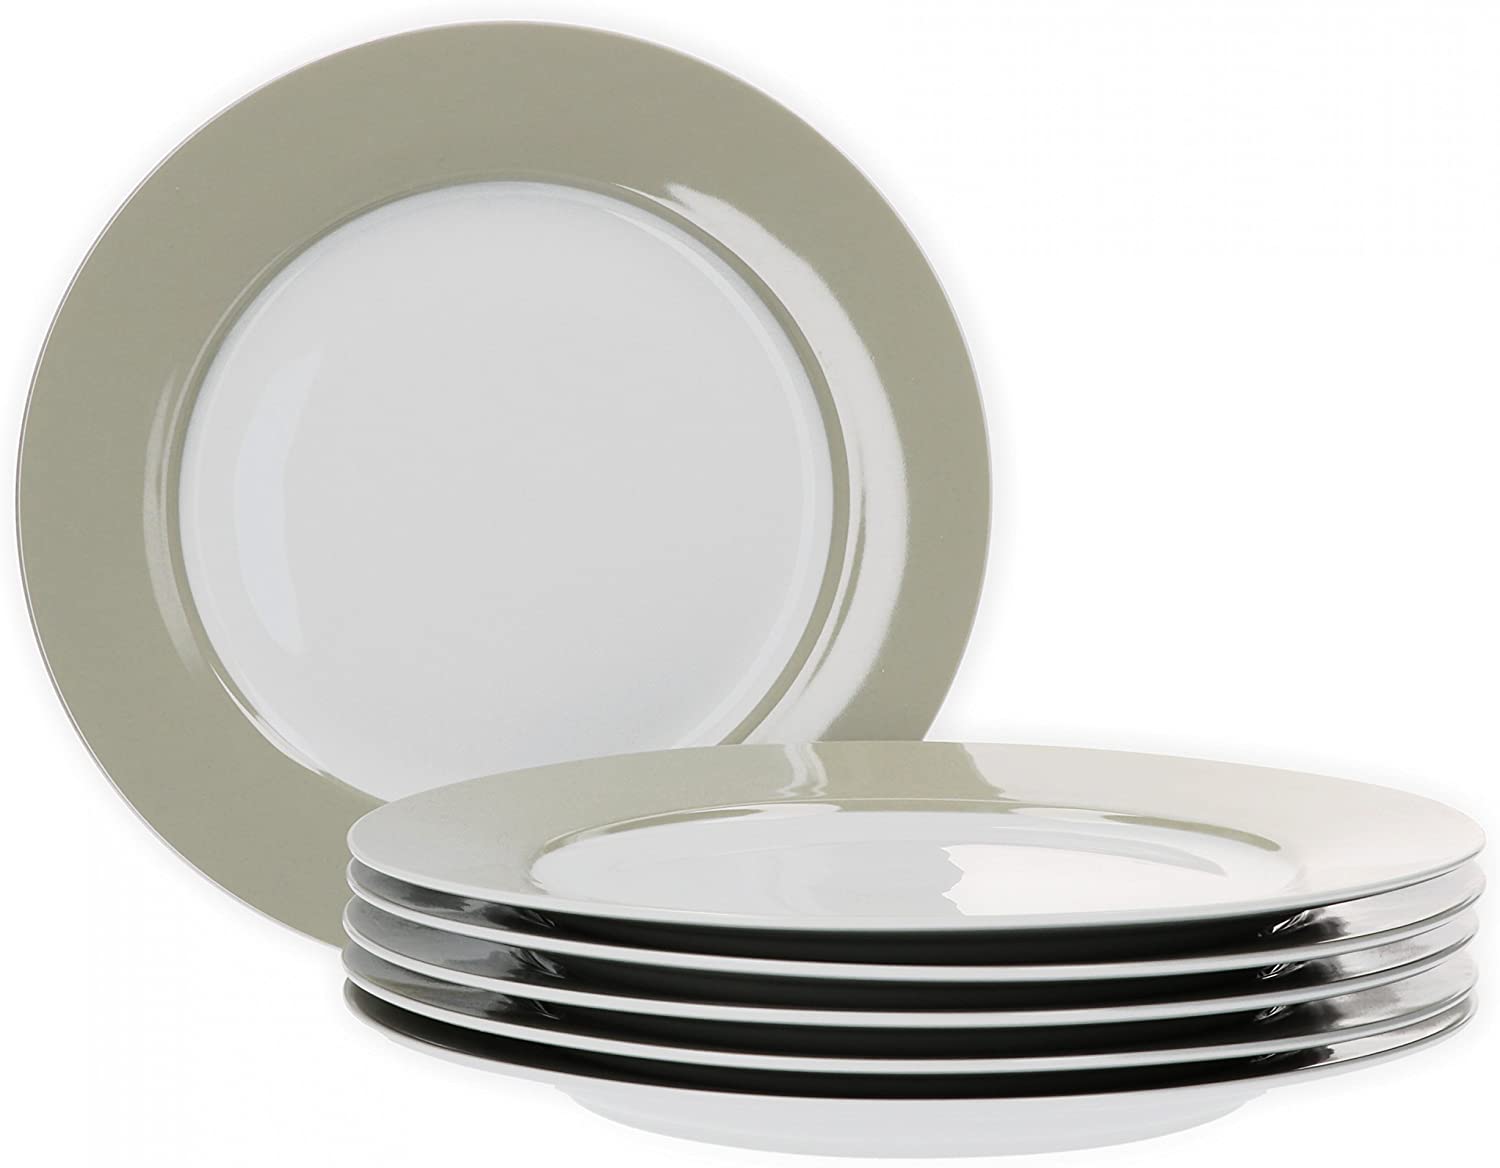 Van Well Vario Dinner Plate Set 6 Pieces I Dinner Service for 6 People I Flat Dining Plate with Diameter 26.5 cm I Porcelain Service White with Beige Rim I Plate Set Microwave Safe